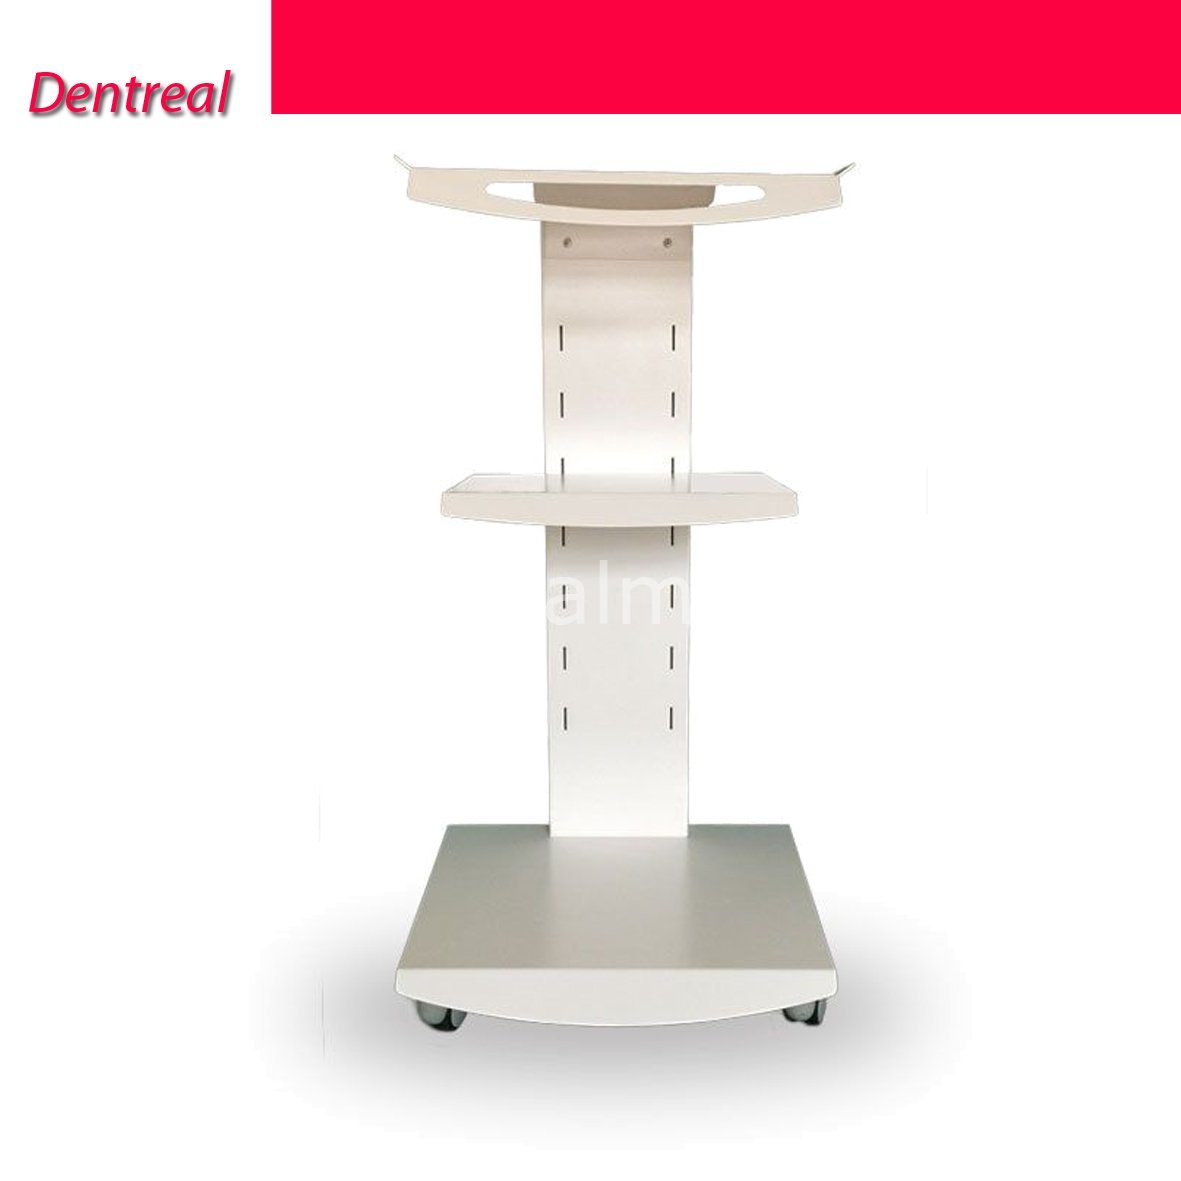 DentrealStore - Dentkonsept Movable Table - Treatment Trolley - Implant Stand - D3